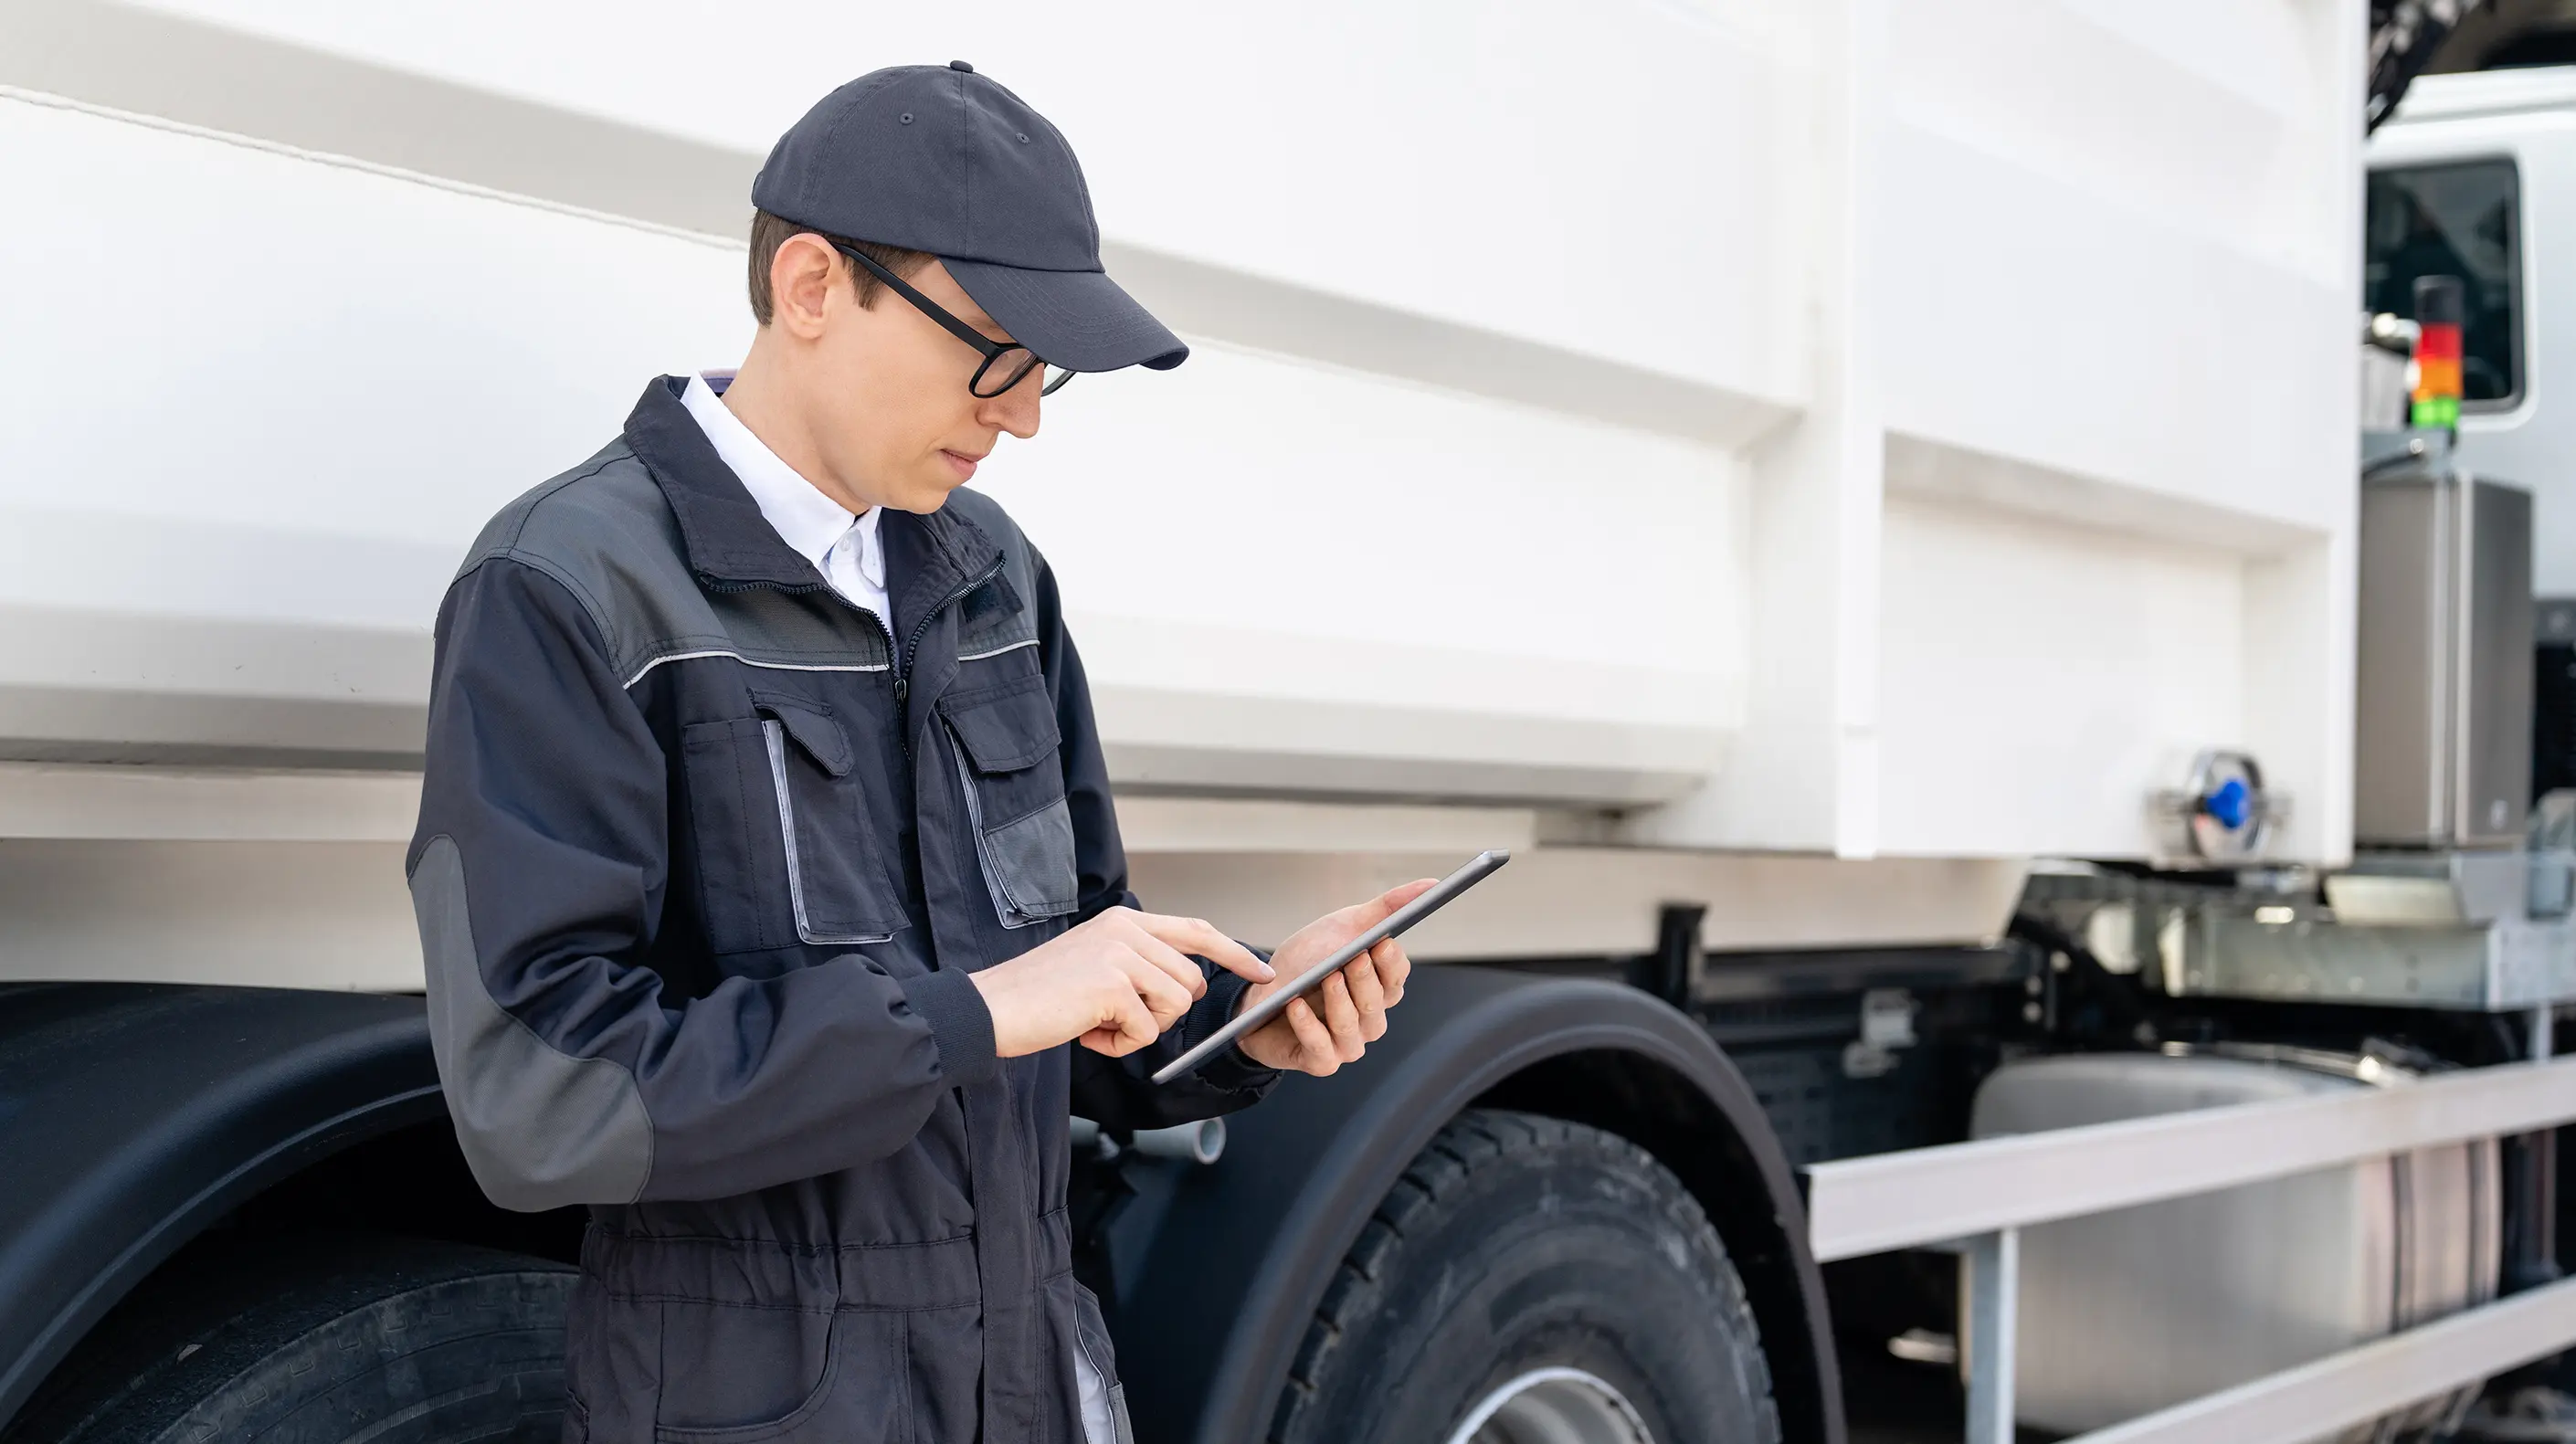 Fleet manager looking at a tablet while standing in front of a truck.